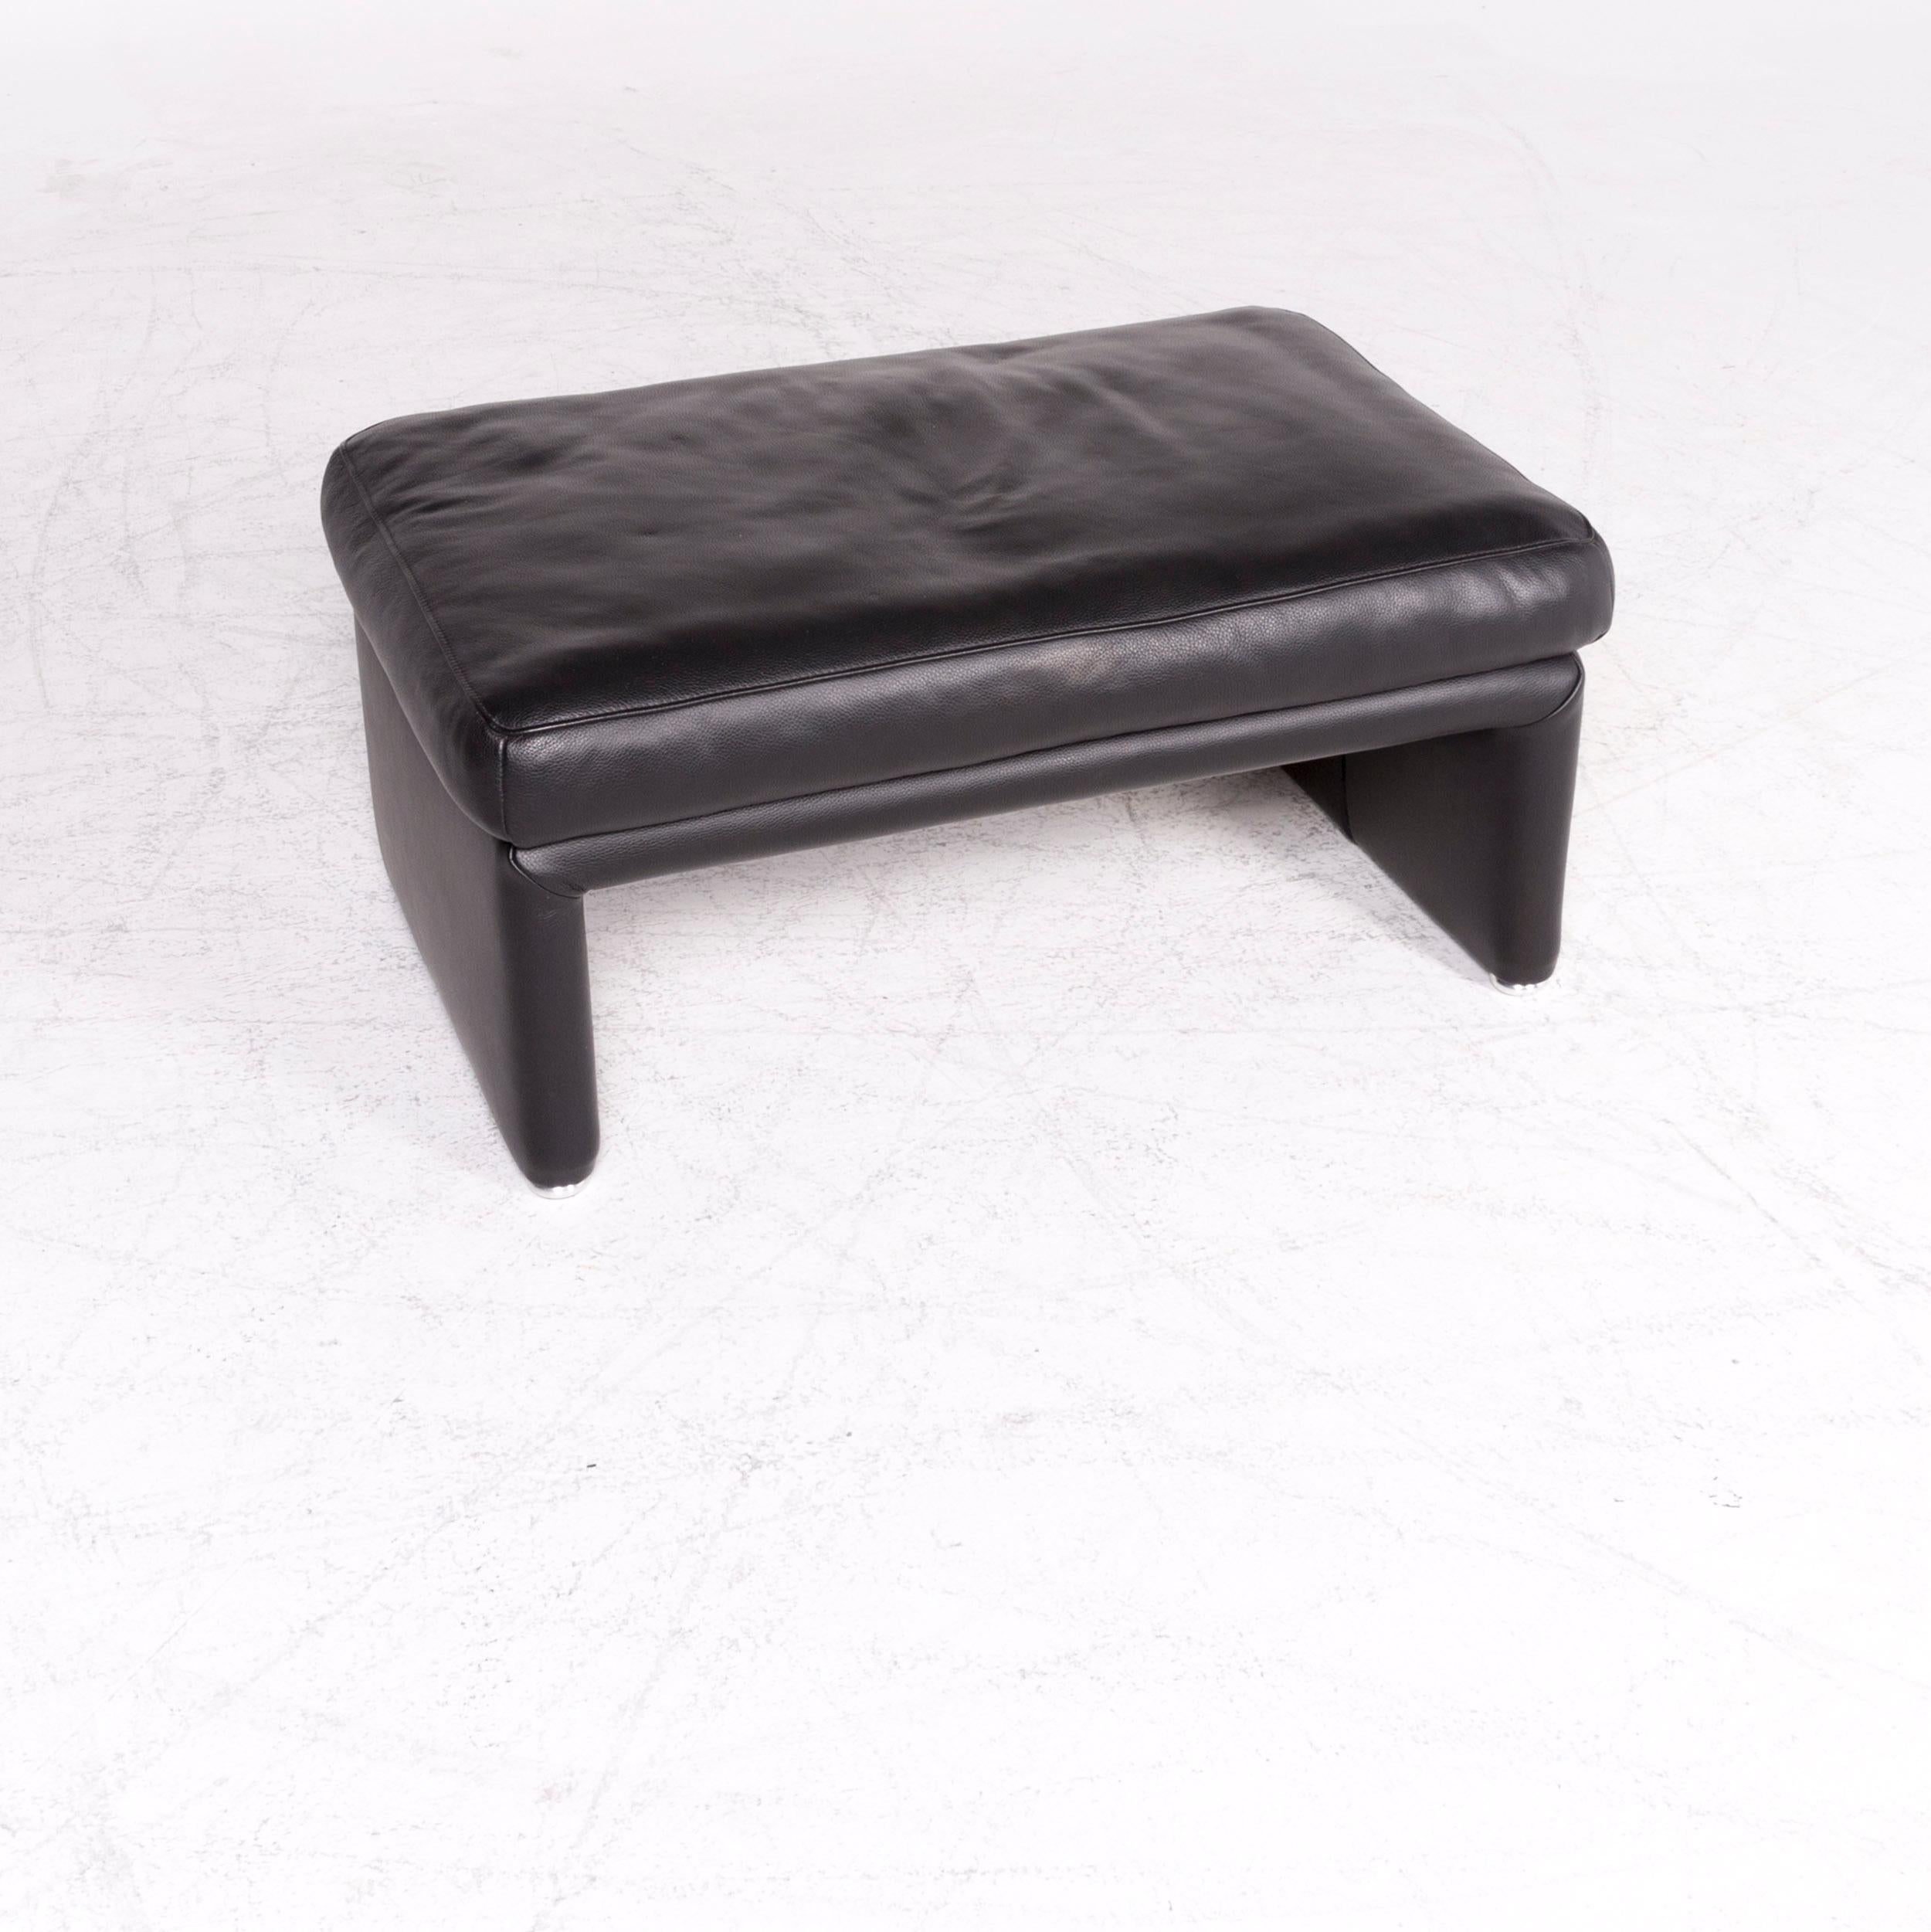 We bring to you a Koinor Raoul designer leather stool black genuine leather stool.

Product measurements in centimeters:

Depth 60
Width 93
Height 43.





  